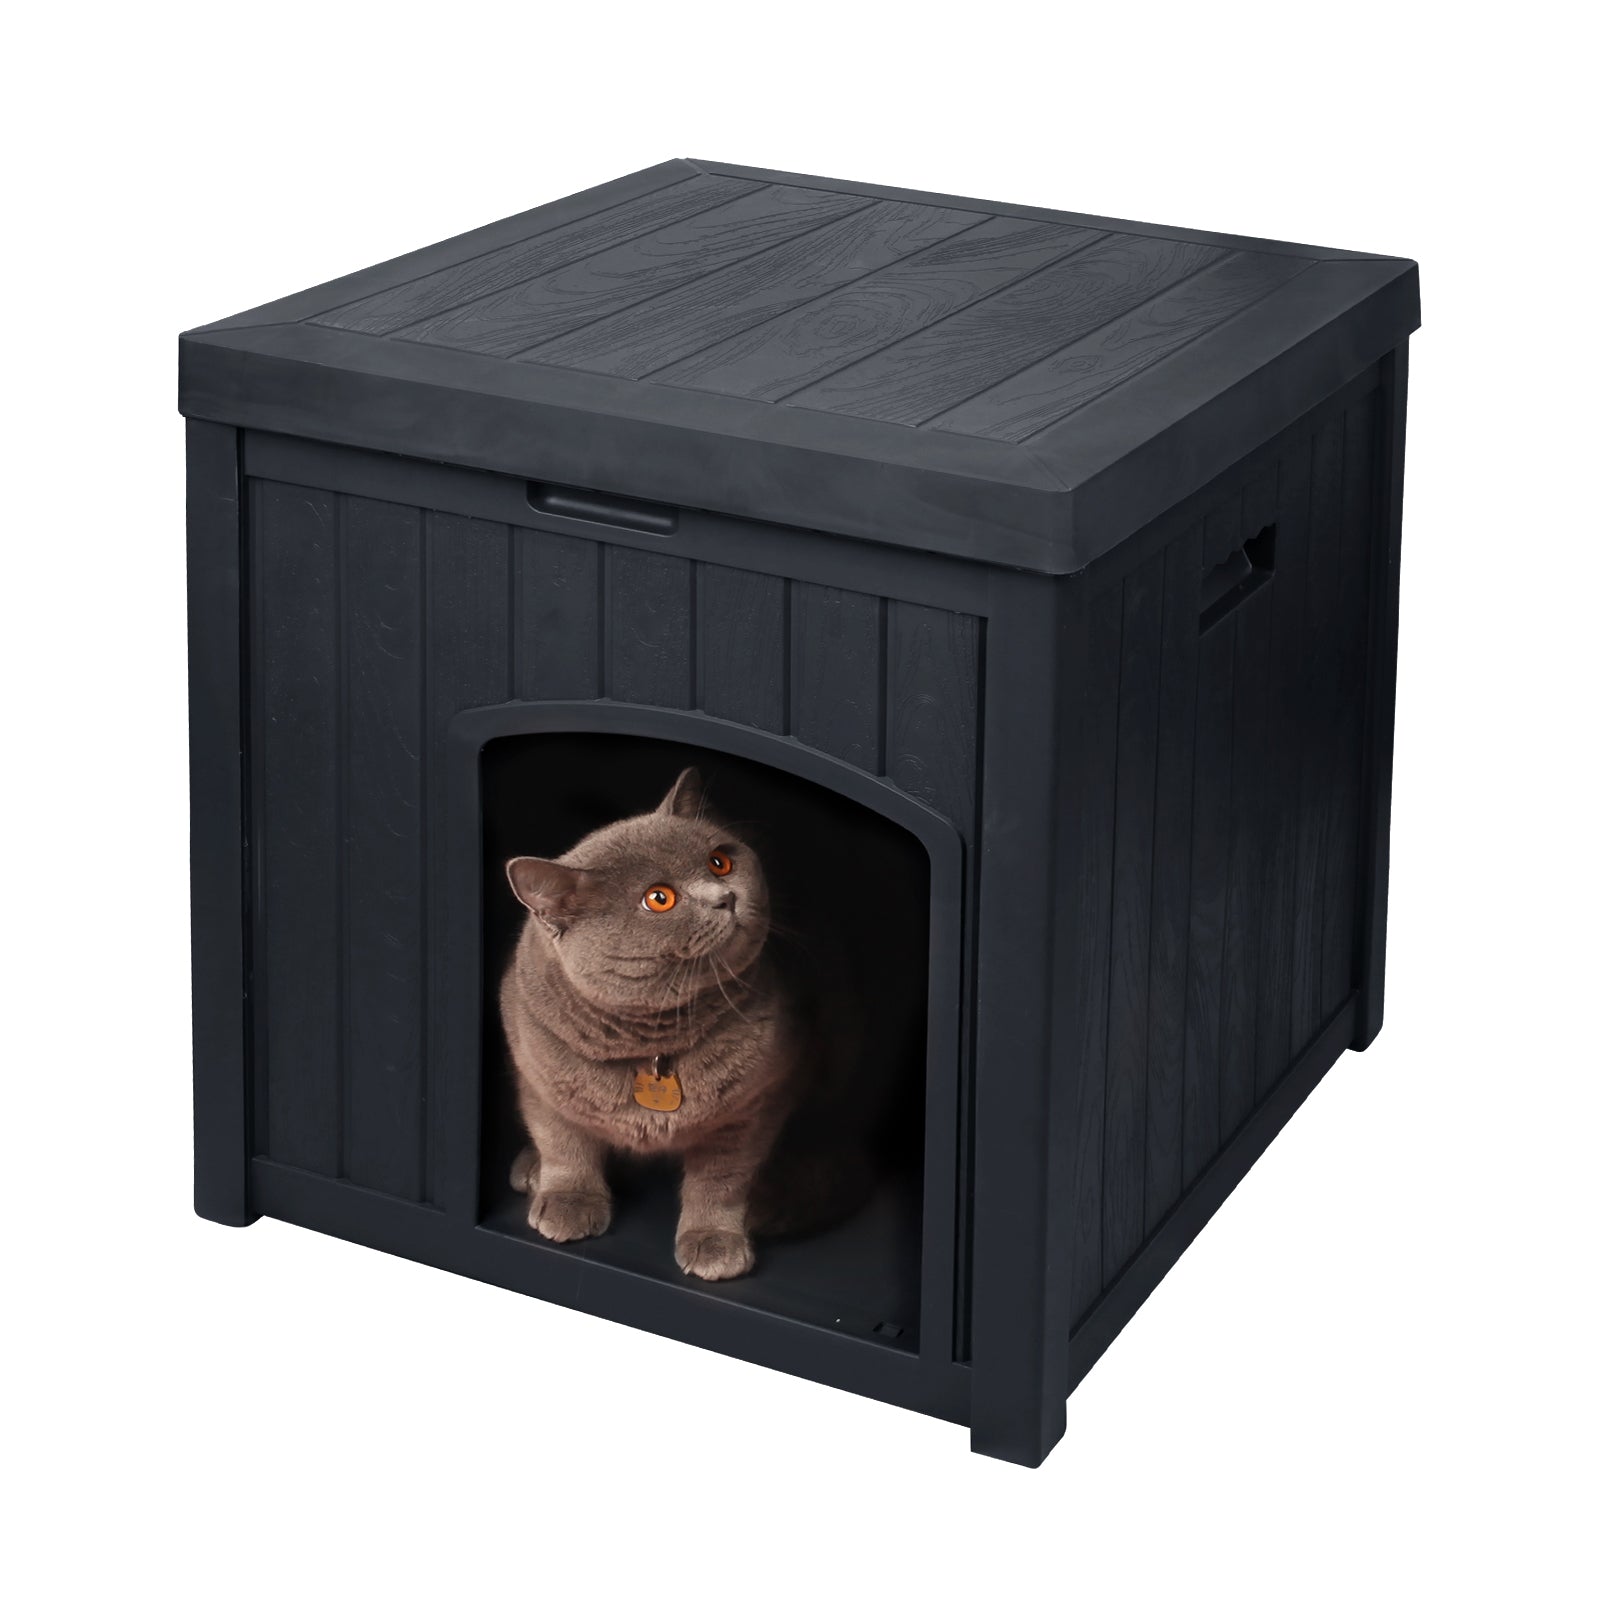 EHHLY Outdoor Cat House for Winter Waterproof, Outside Multiple Feral Cat Houses Weatherproof, Durable Resin Plastic, Black